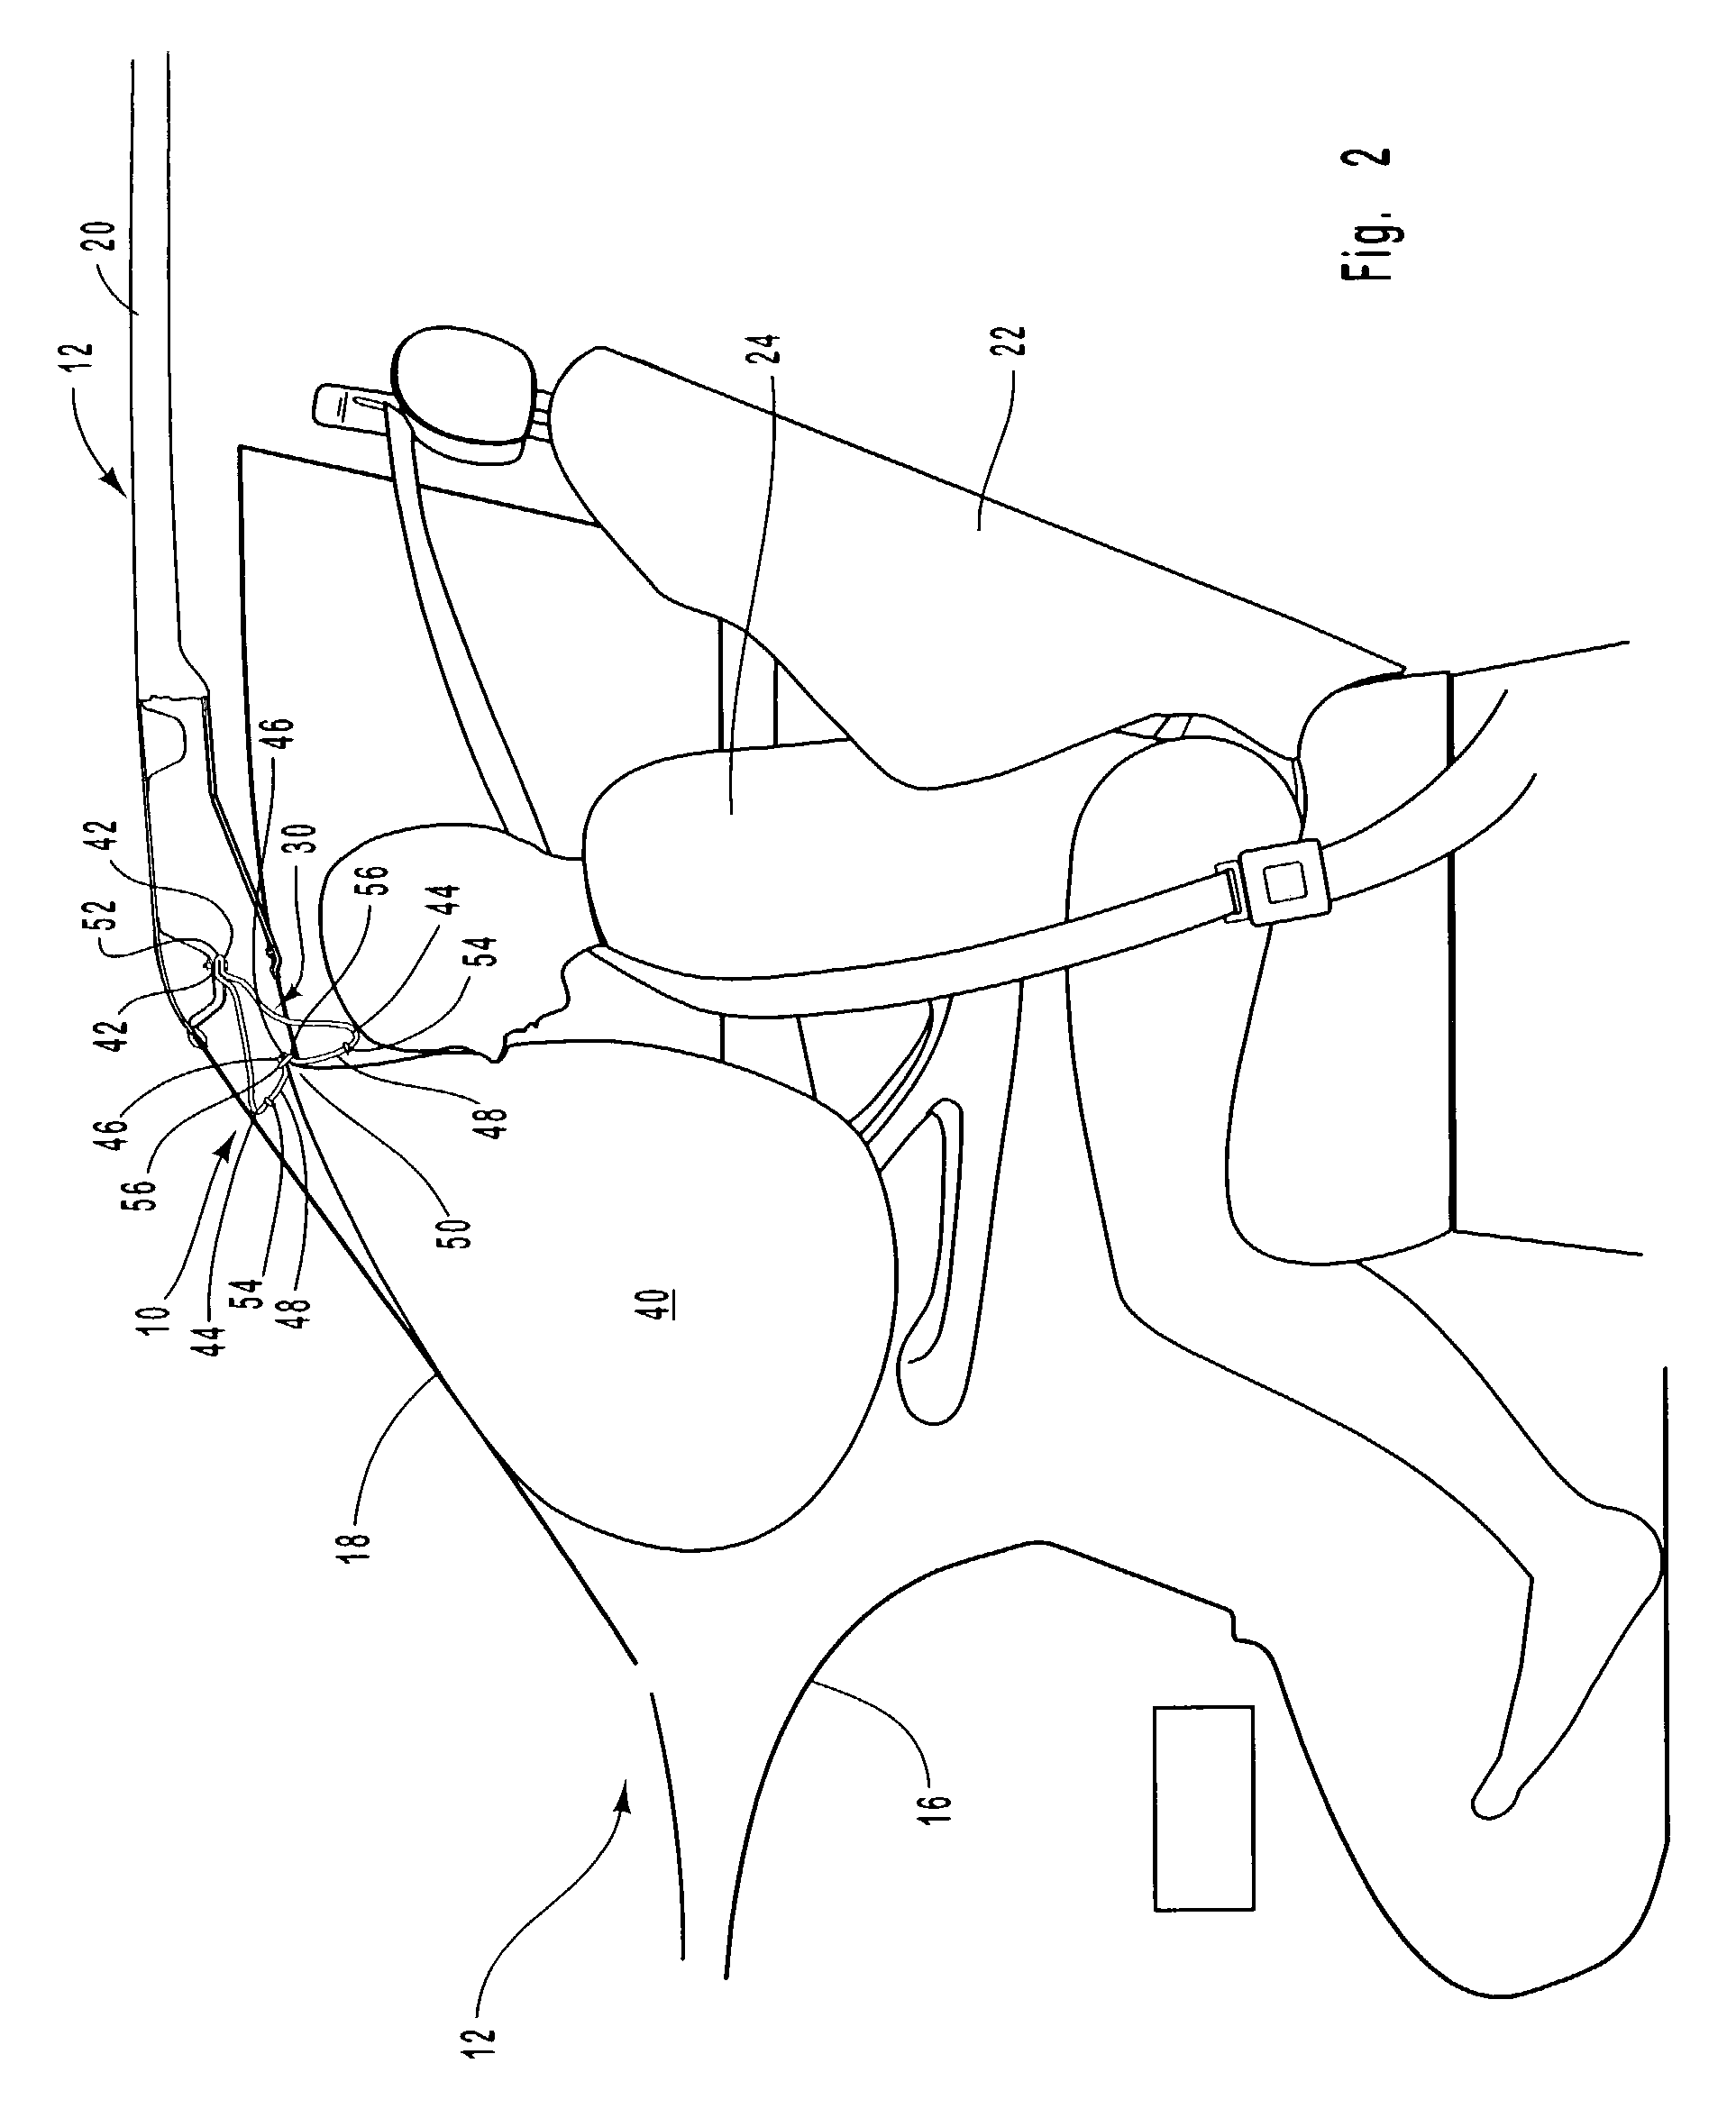 Extensible tethered airbag system